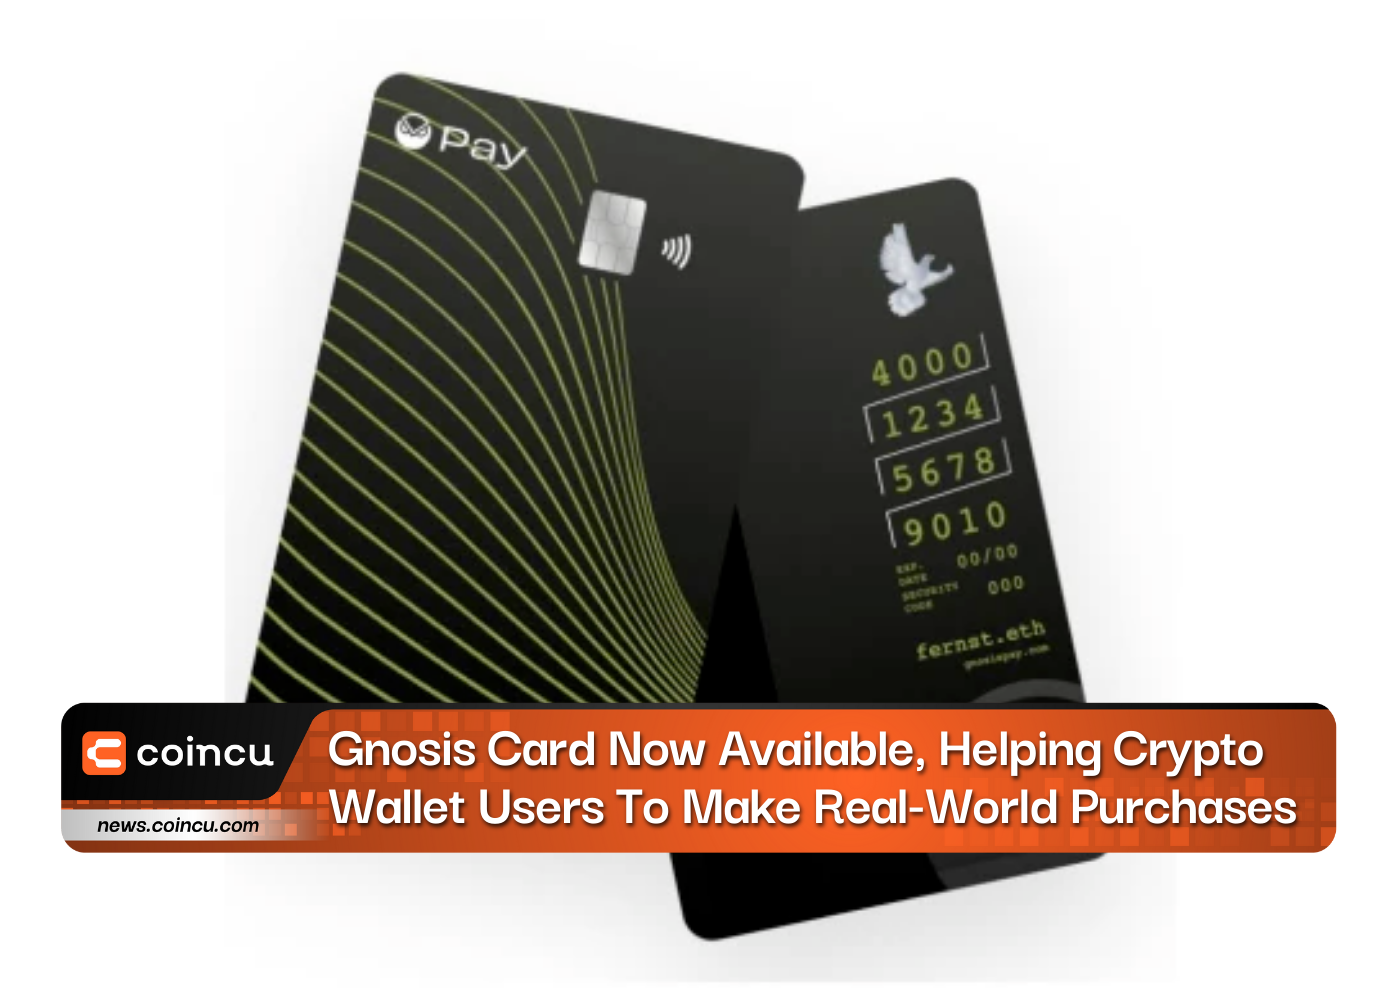 Gnosis Card Now Available, Helping Crypto Wallet Users To Make Real-World Purchases